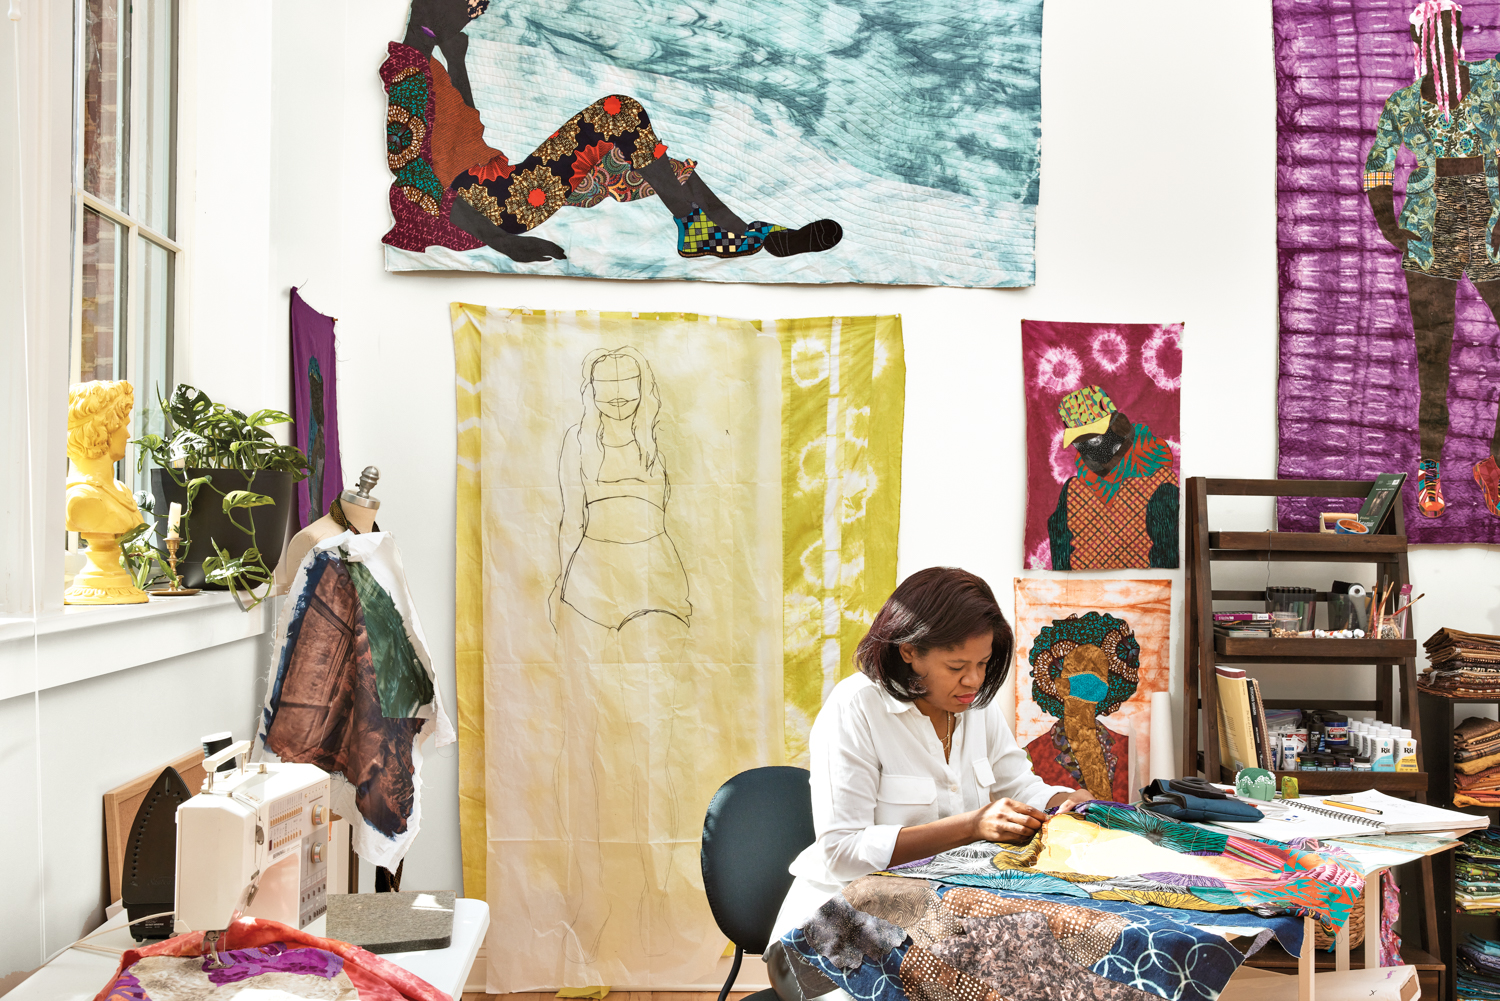 Woman hand-sewing at a desk in a room surrounded by artworks